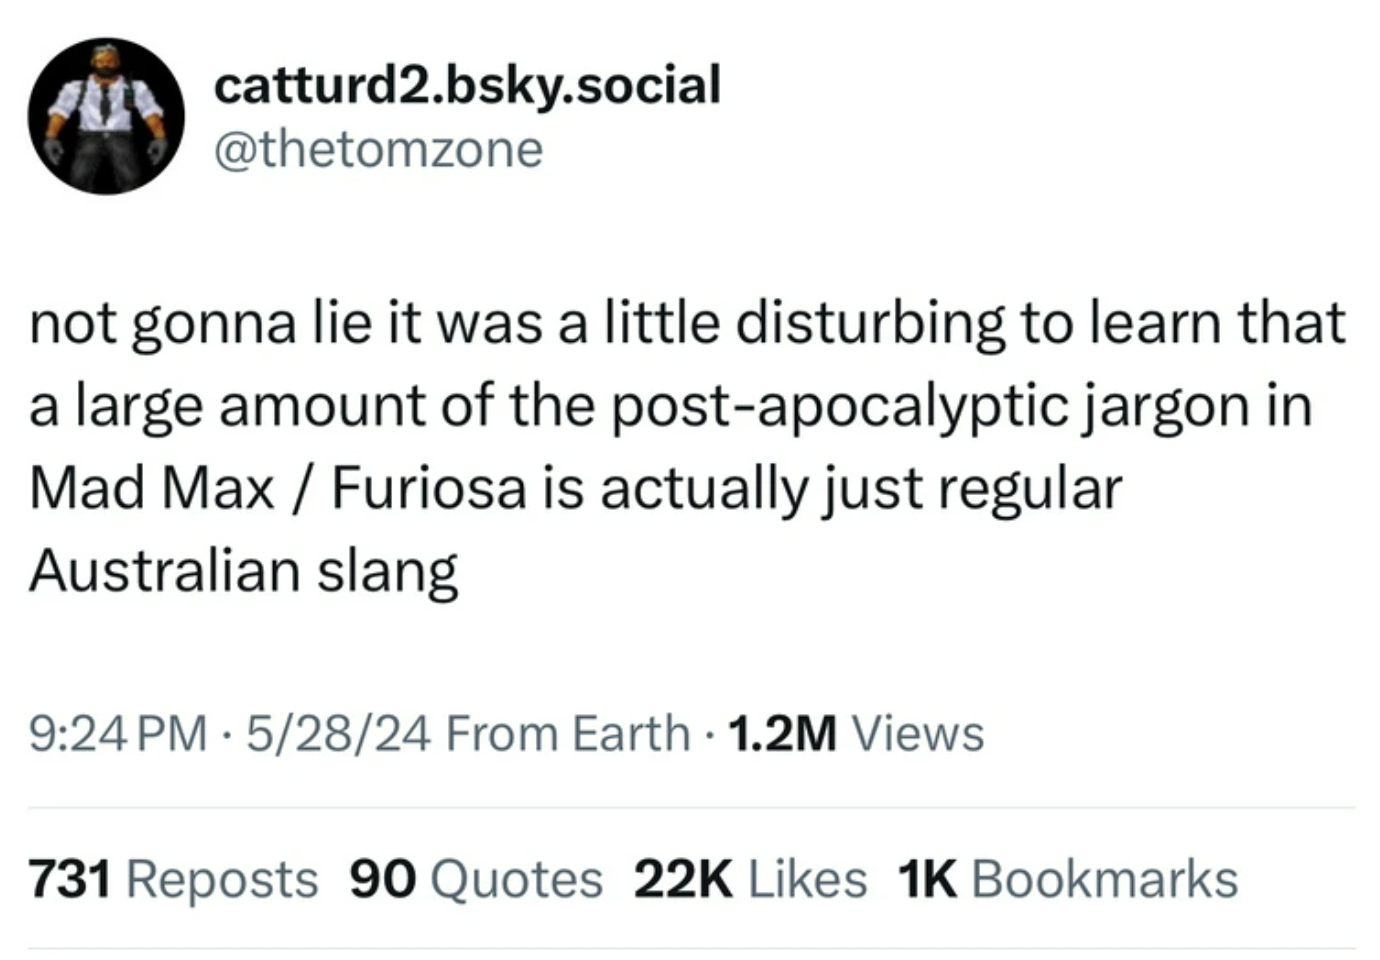 screenshot - A catturd2.bsky.social not gonna lie it was a little disturbing to learn that a large amount of the postapocalyptic jargon in Mad Max Furiosa is actually just regular Australian slang 52824 From Earth 1.2M Views 731 Reposts 90 Quotes 22K 1K B